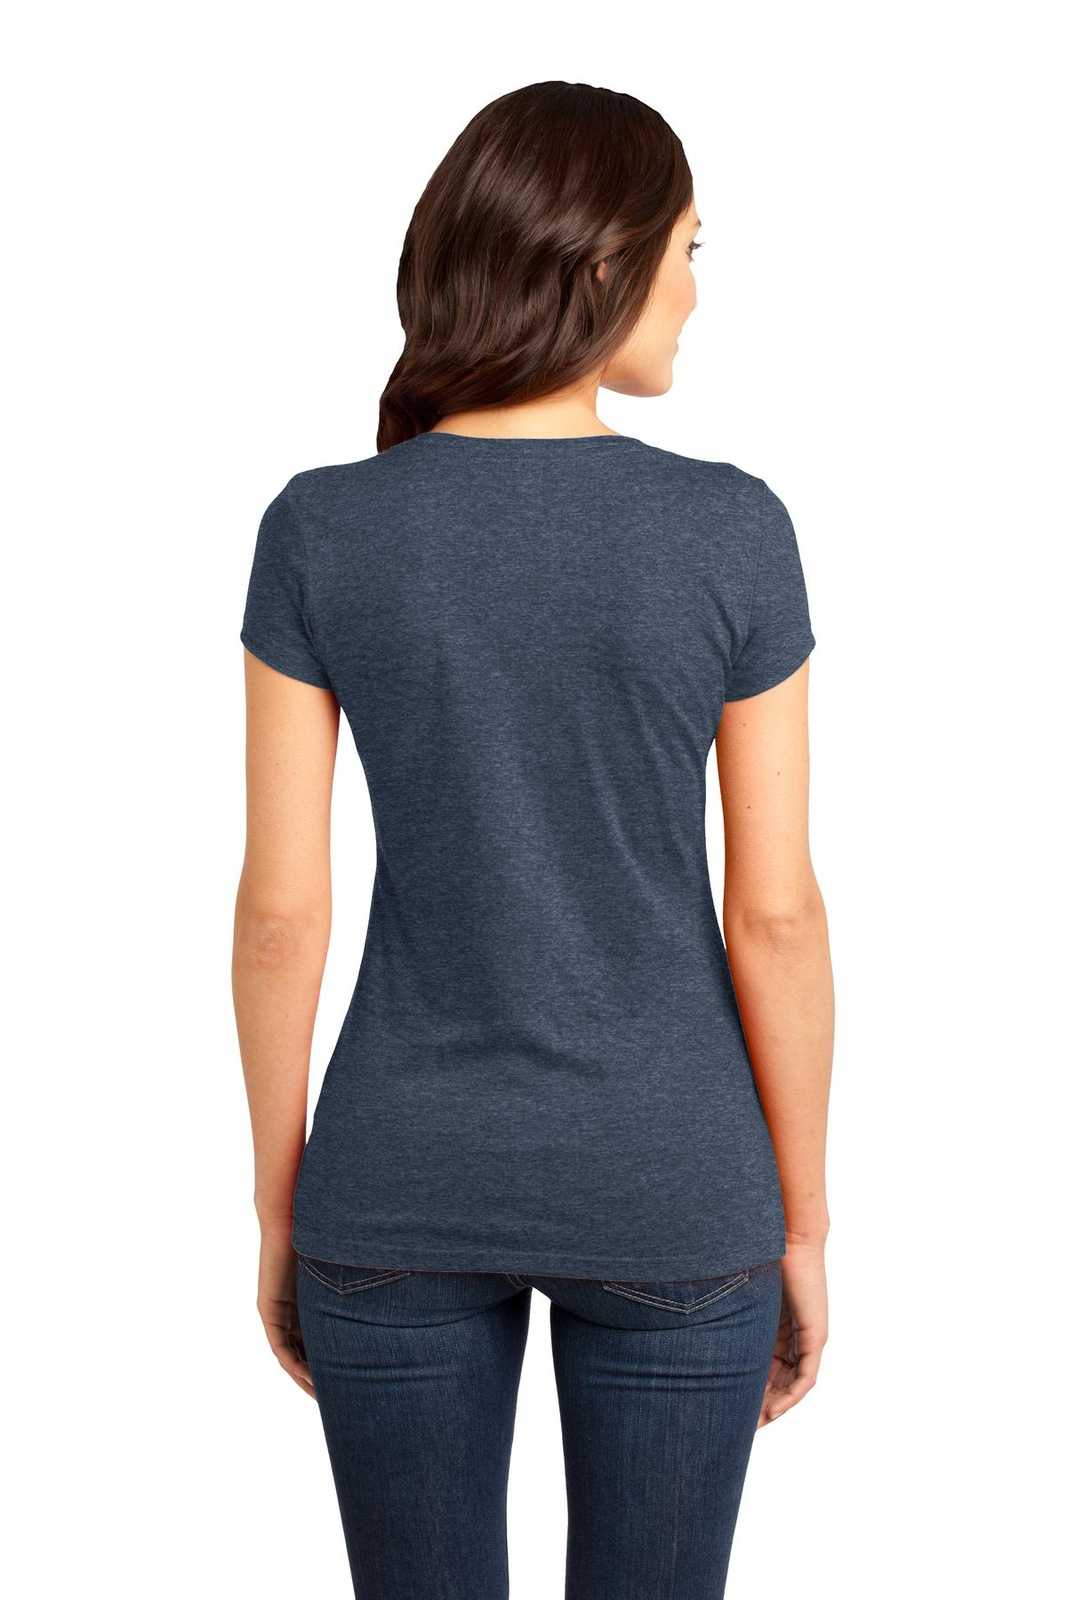 District DT6001 Women's Fitted Very Important Tee - Heathered Navy - HIT a Double - 1